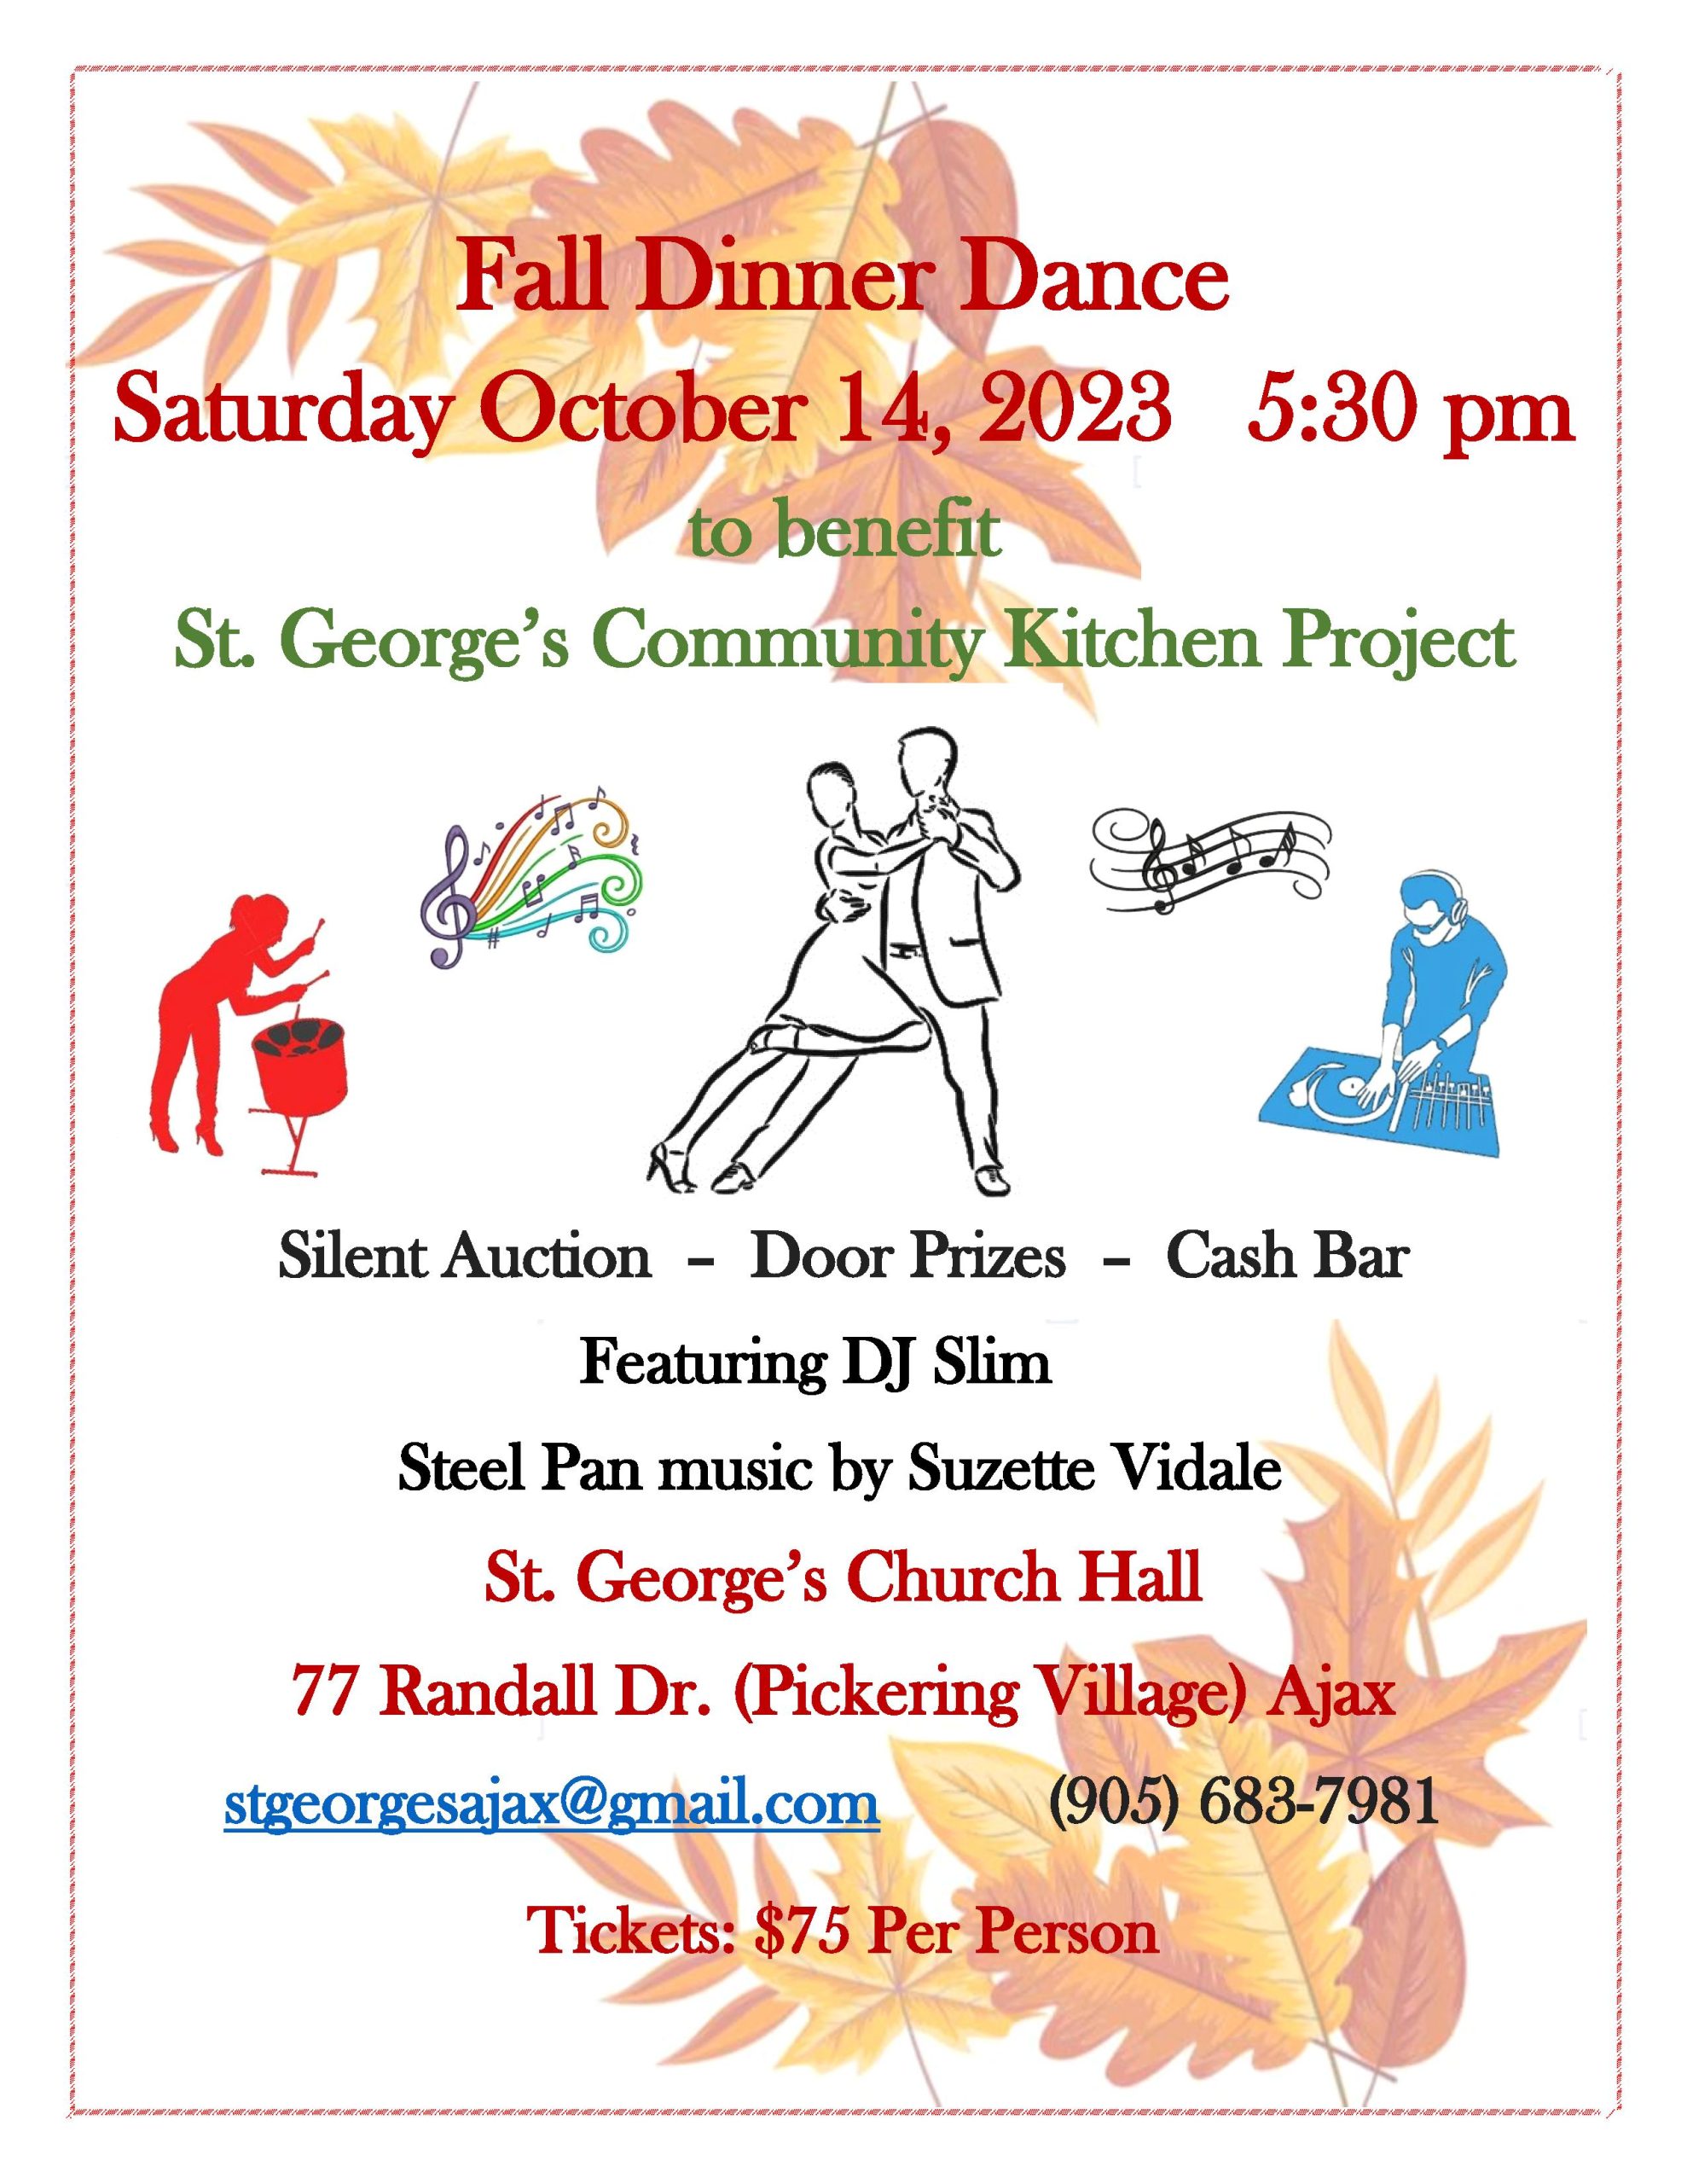 Fall Dinner Dance to benefit St. George's Community Kitchen Project Saturday, Oct 14, 2023 at 5:30 pm Silent auction, door prizes, cash bar Featuring DJ Slim Tickets  per person St. George's Church Hall 77 Randall Drive Ajax stgeorgesajax@gmail.com or 905-683-7981